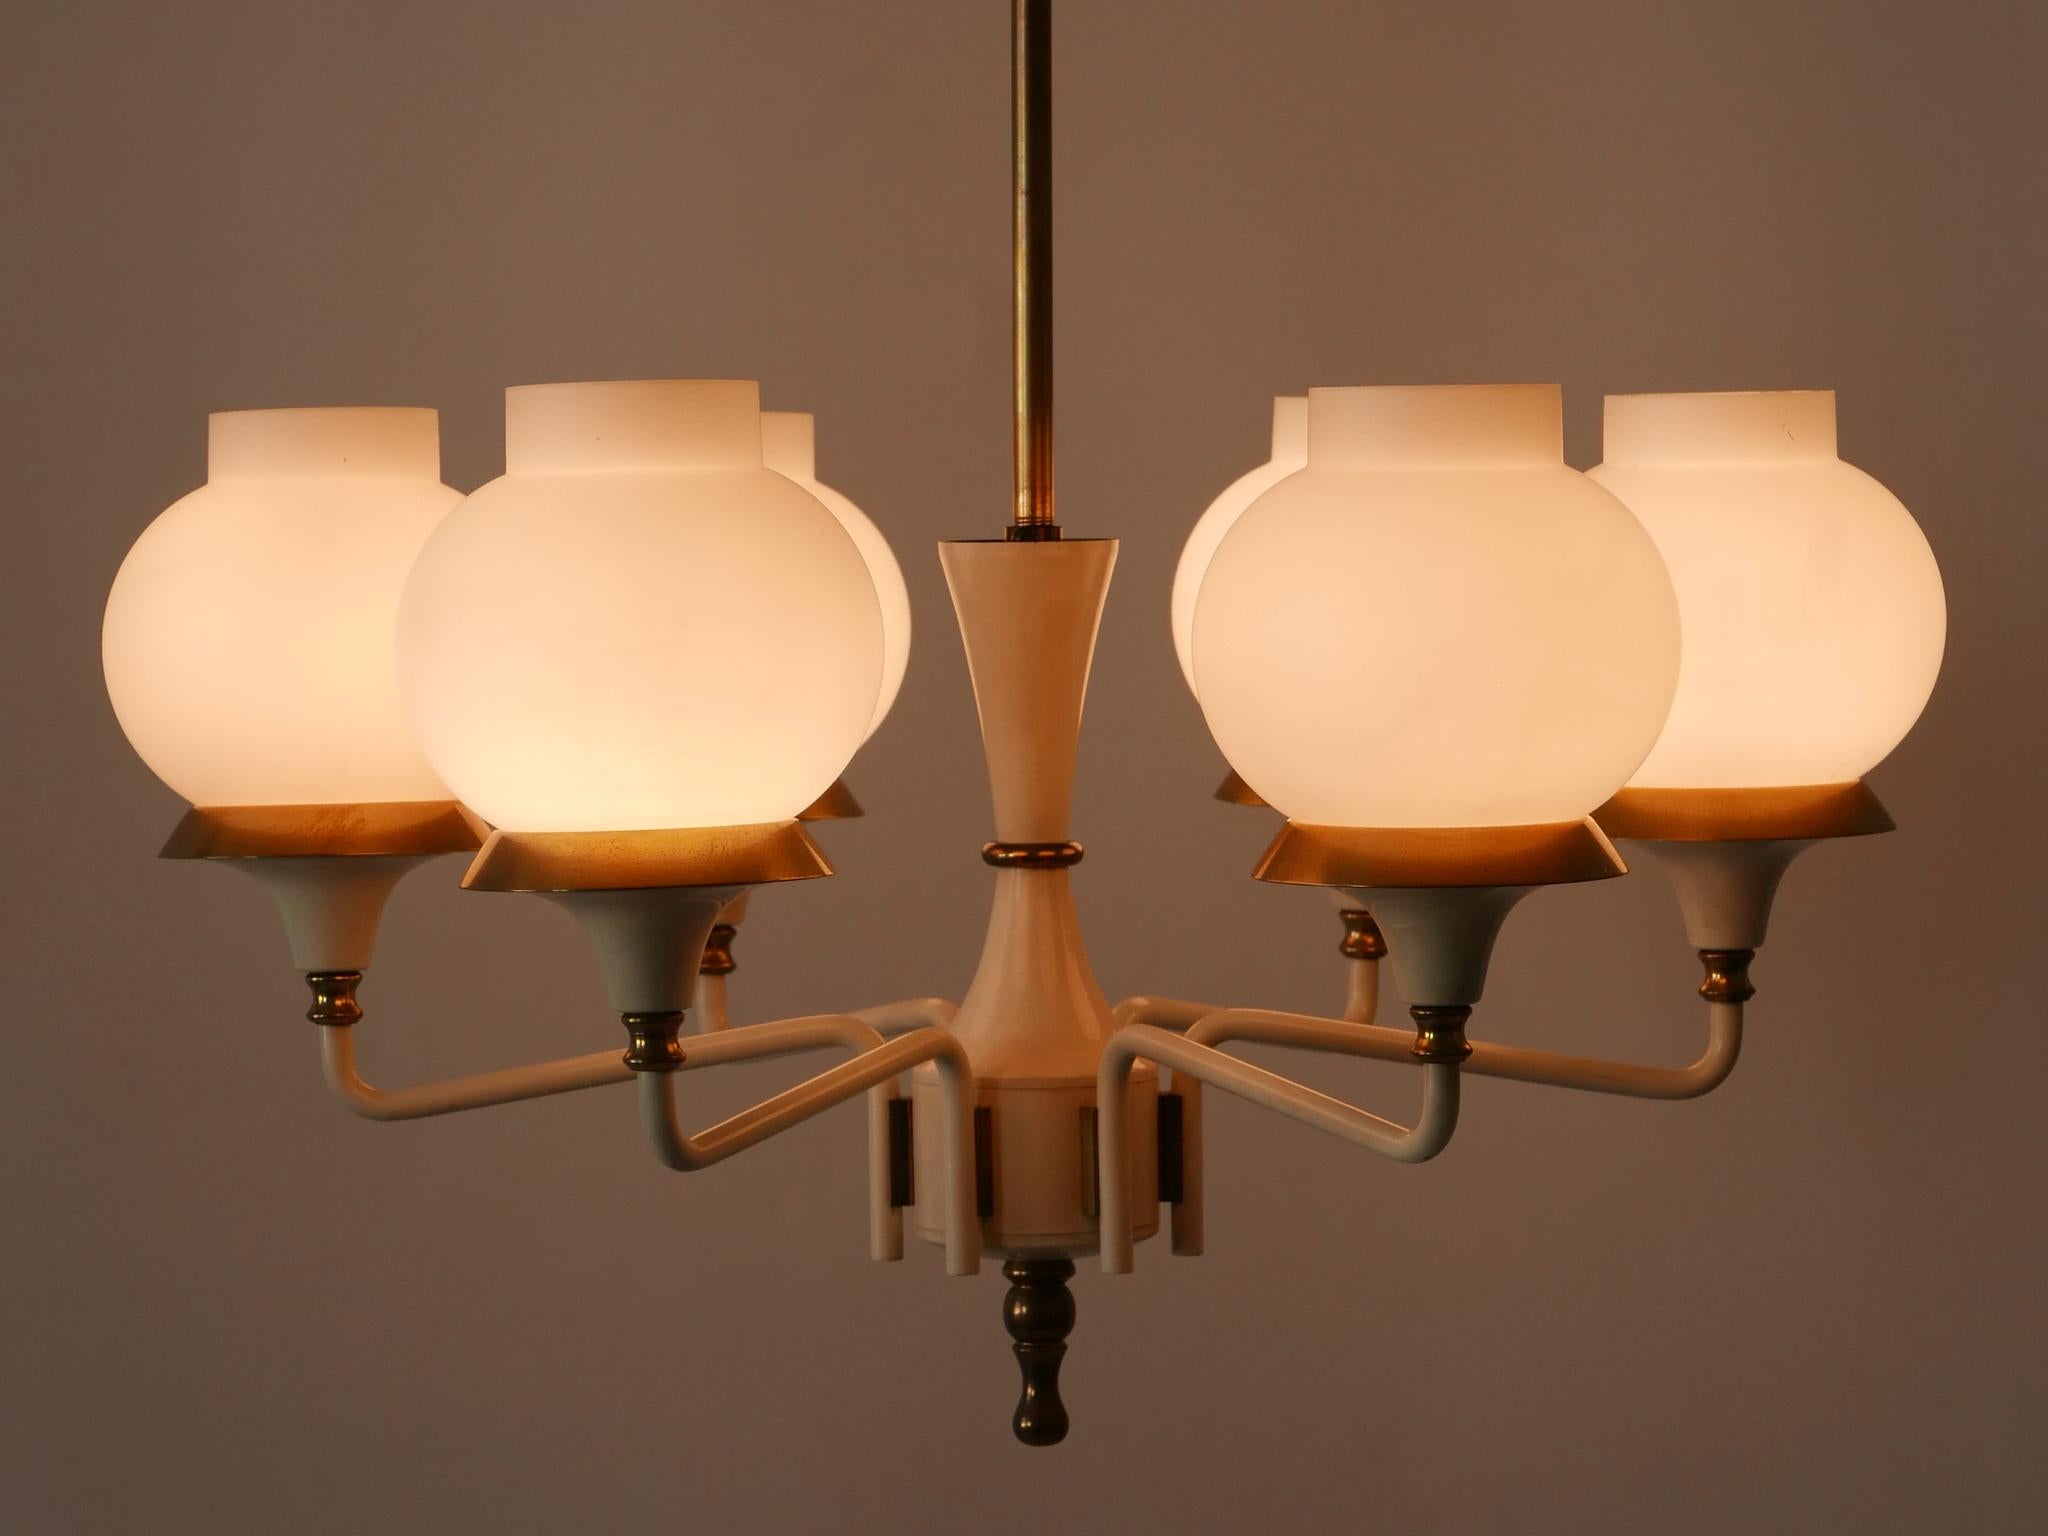 Highly decorative Mid-Century Modern six-armed tulip chandelier or pendant lamp. Designed and manufactured by Kaiser Leuchten, Germany, 1950s.

Executed in brass and opaline glass, the lamp needs 6 x E14 / E12 Edison screw fit bulbs. It is wired,